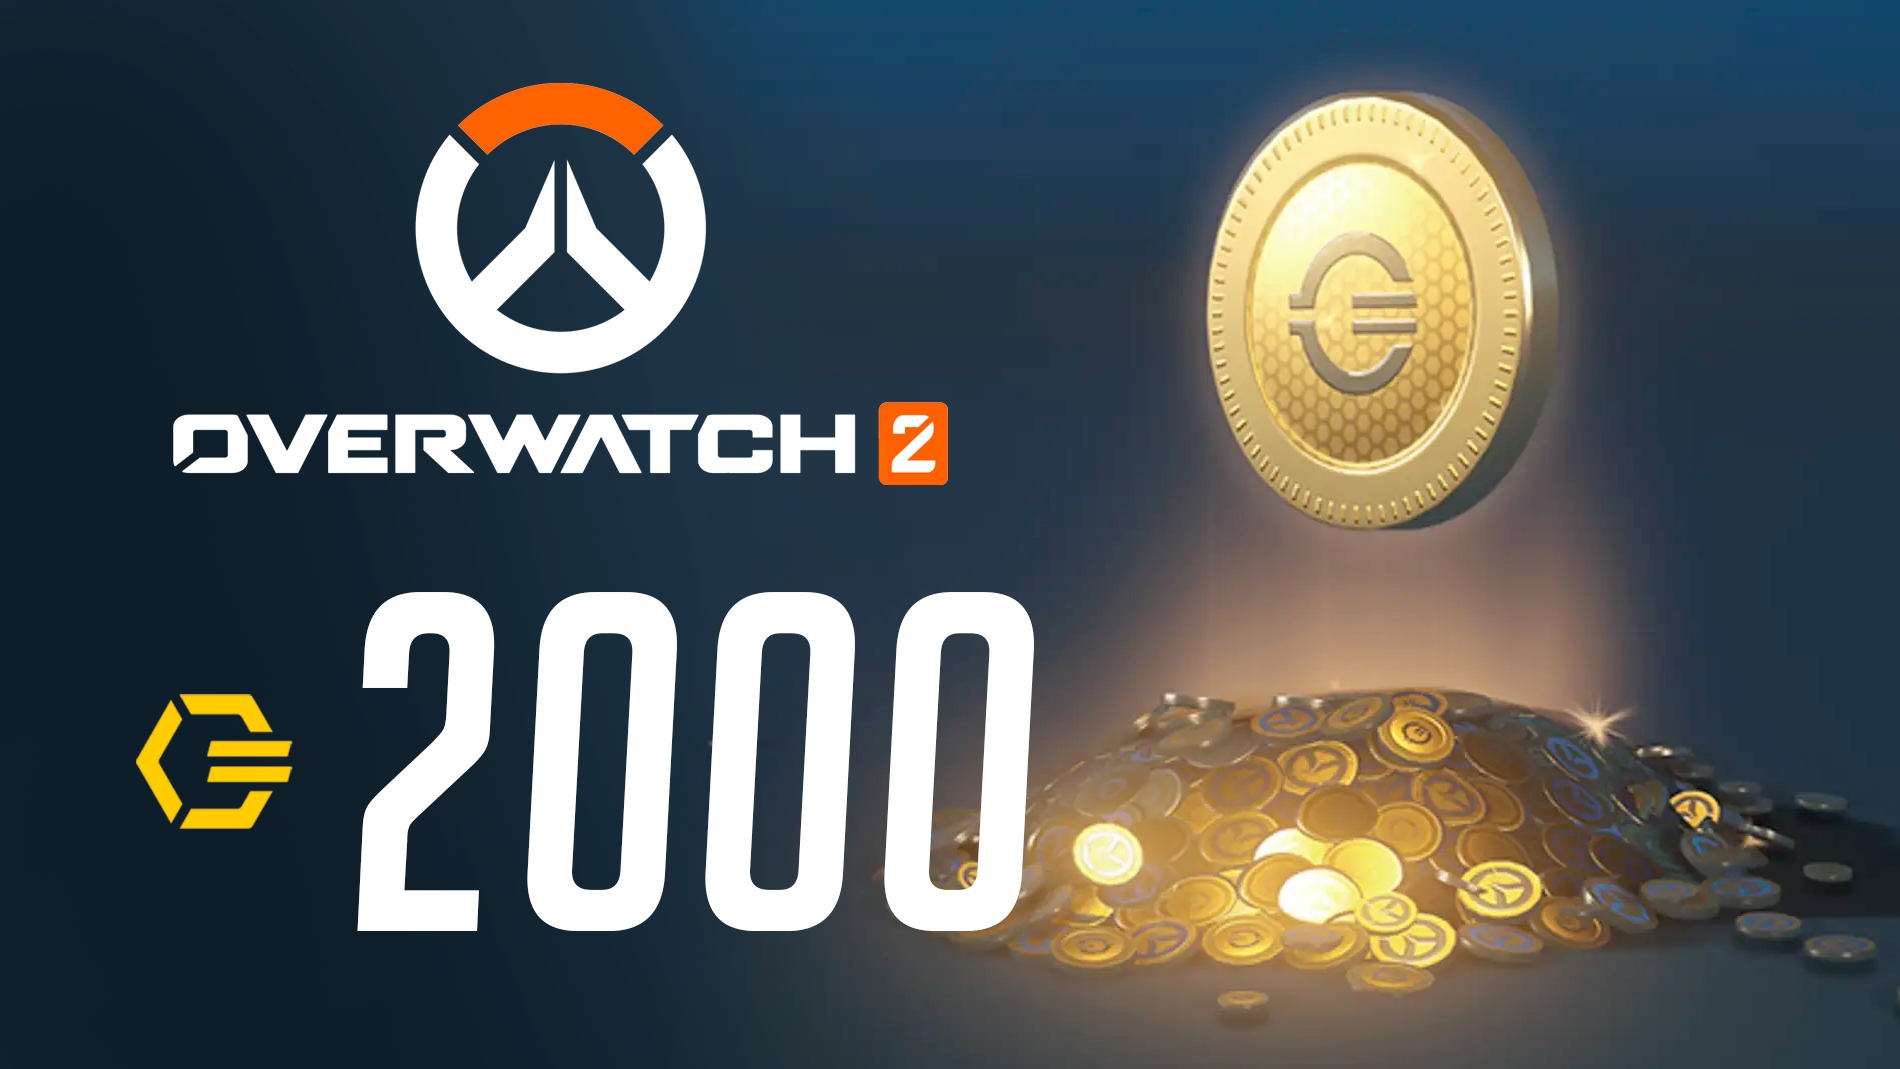 Get Overwatch Coins for free with Microsoft Rewards, here's how | Windows Central